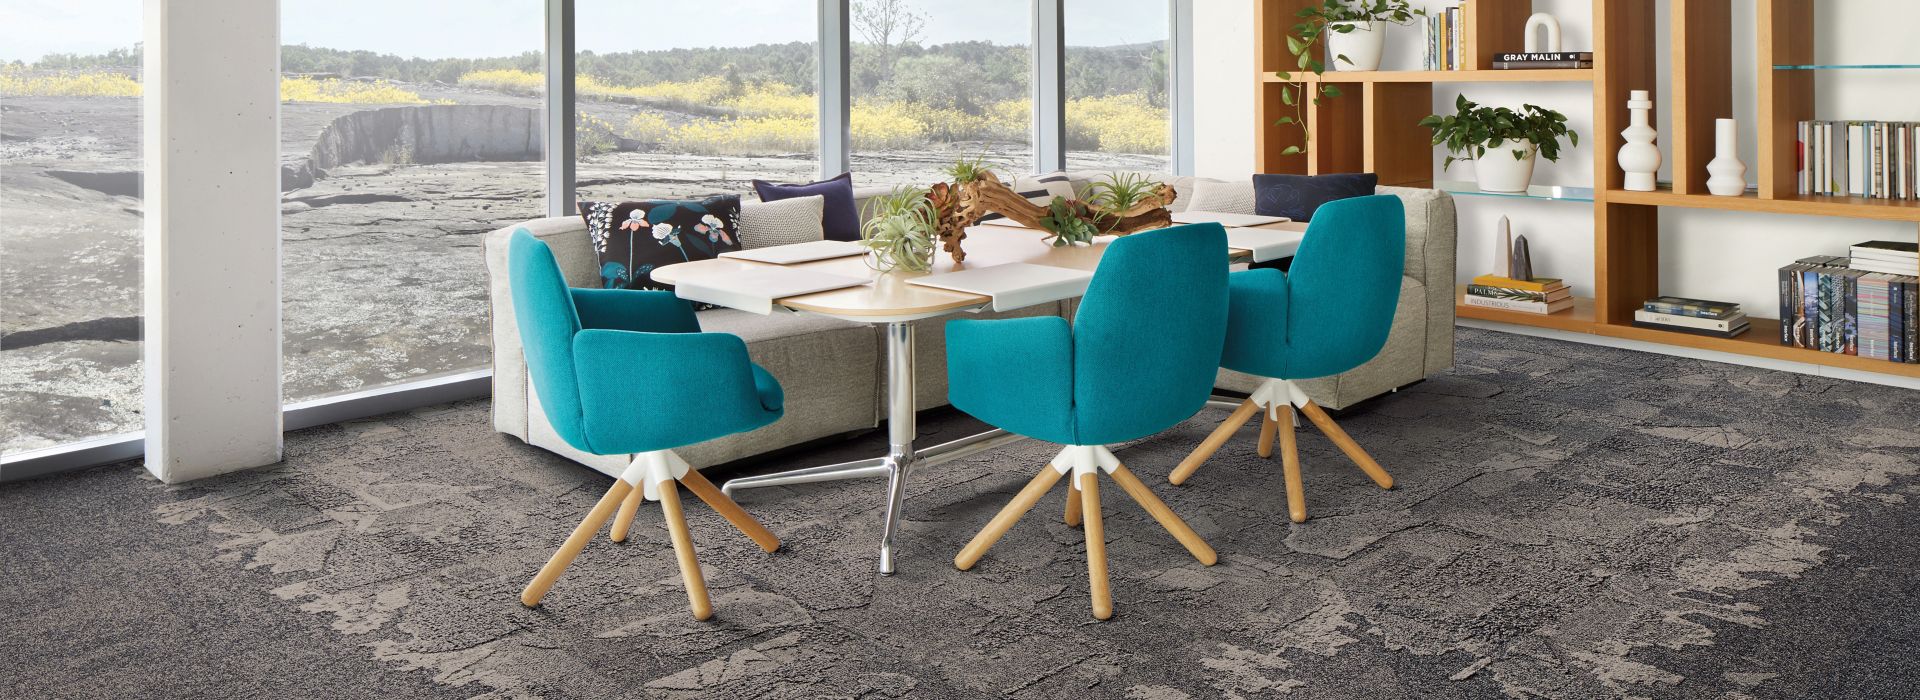 Interface Flat Rock, Bridge Creek, and Mountain Rock in private meeting room with blue chairs and large windows imagen número 1